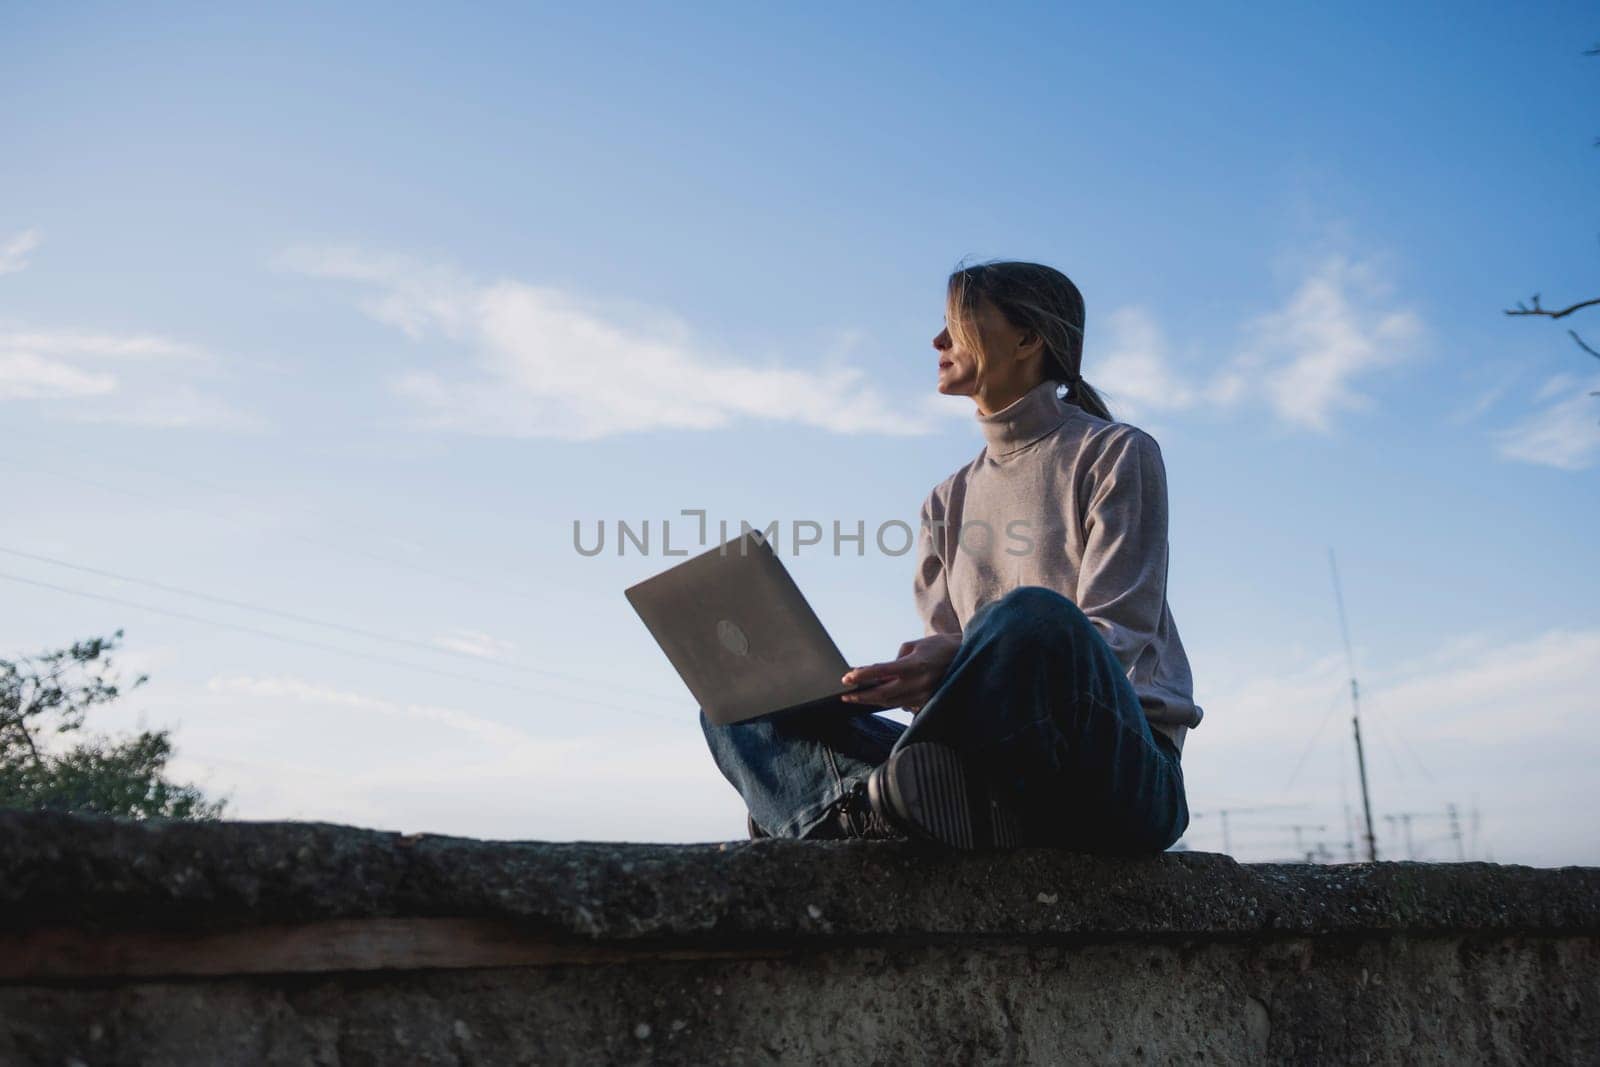 Woman freelancer uses laptop on cement wall outdoors against the sky. The woman to be focused on her work or enjoying some leisure time while using her laptop